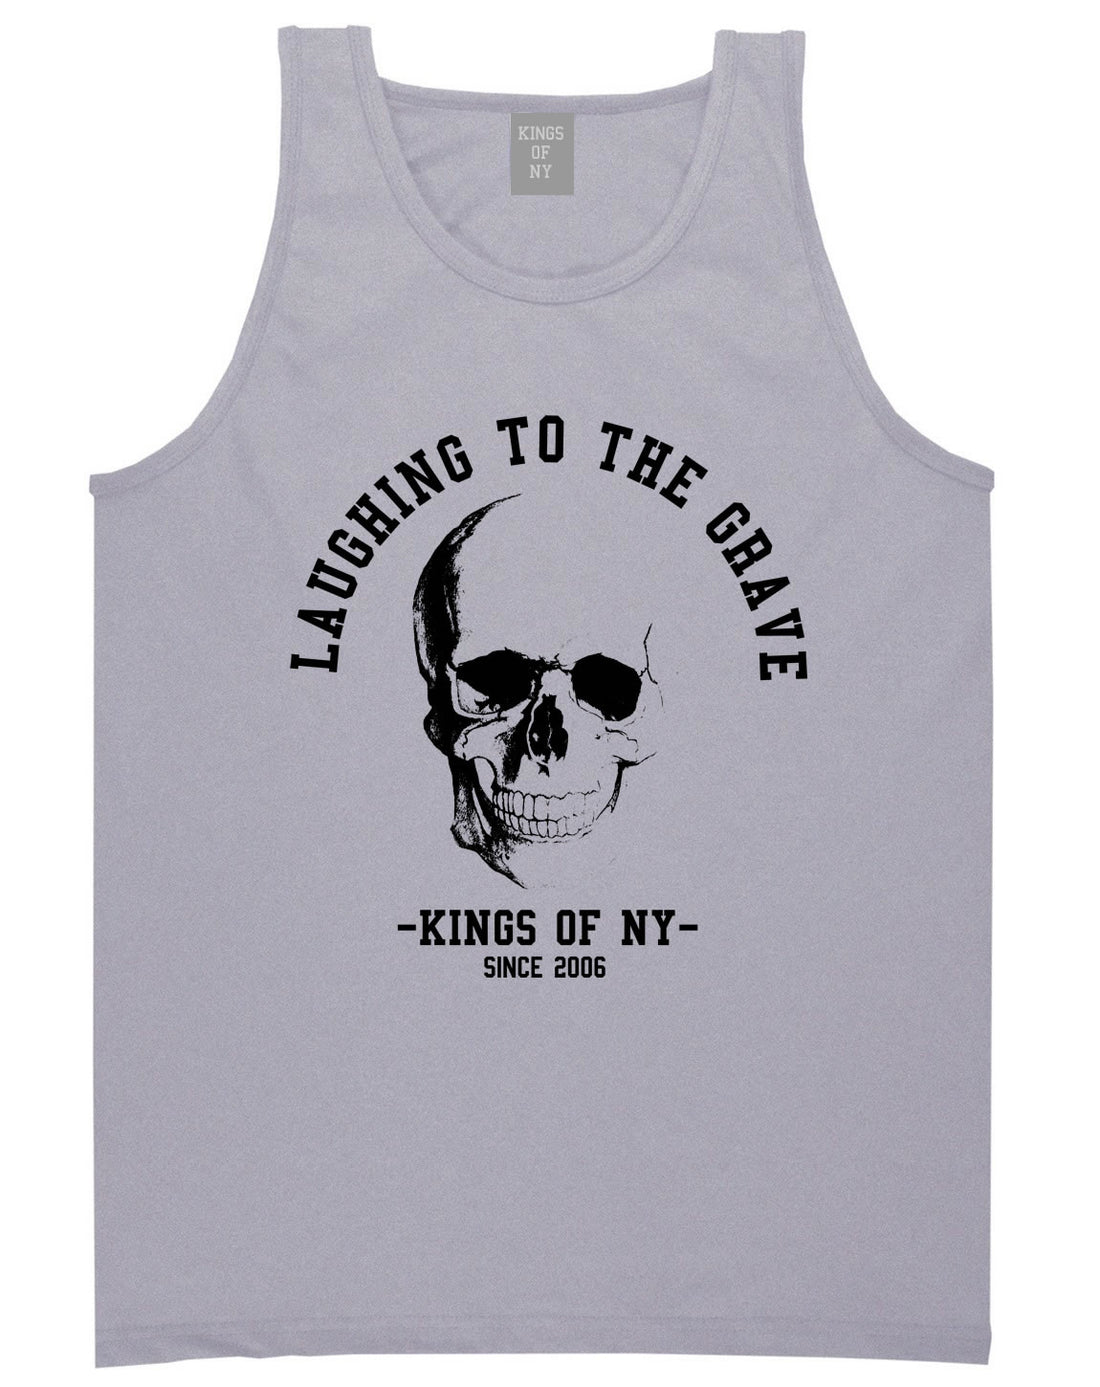 Laughing To The Grave Skull 2006 Tank Top in Grey By Kings Of NY